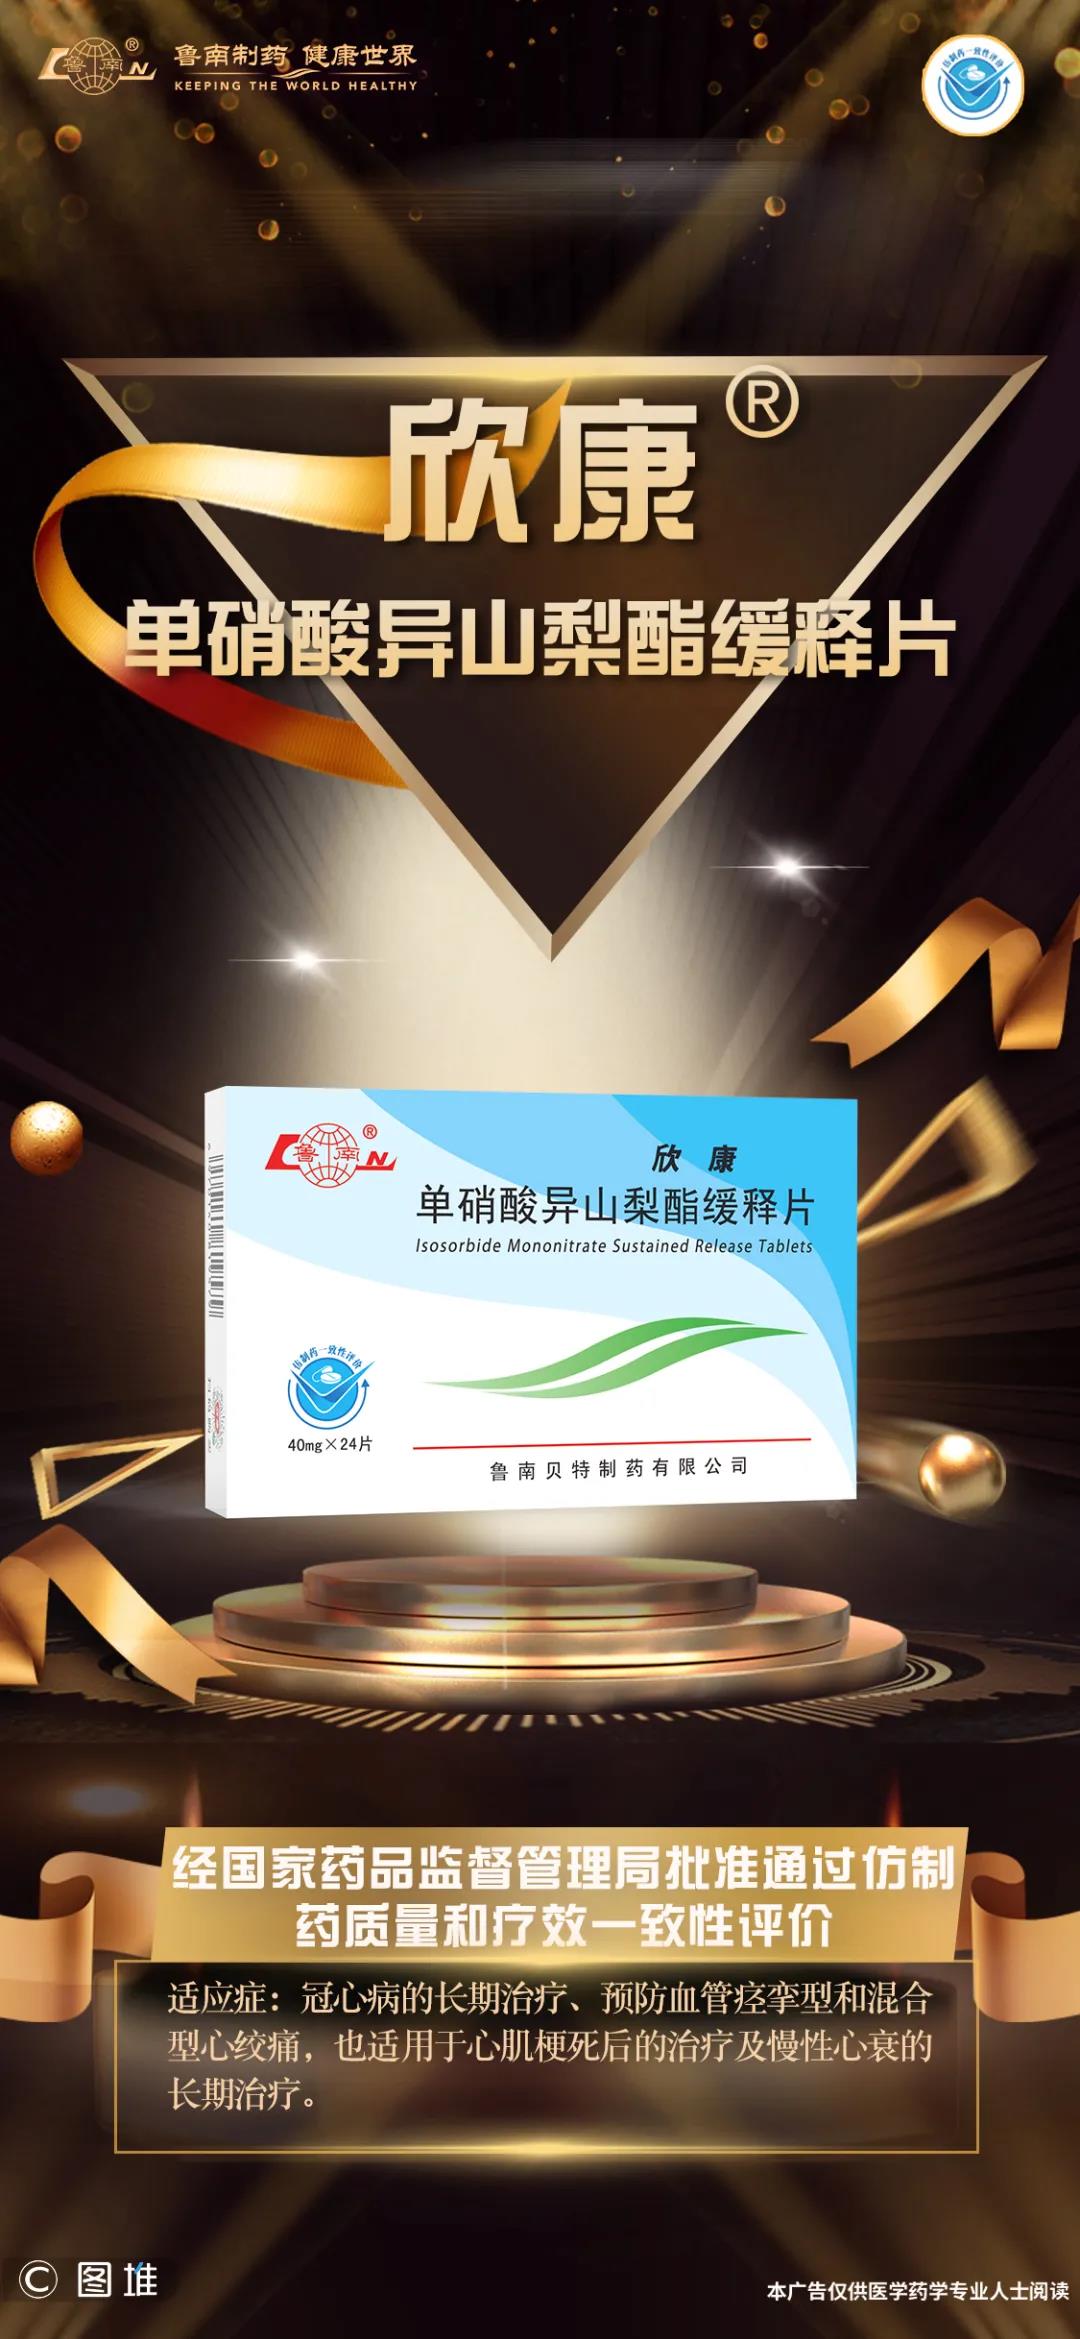 Xinkang® Isossorbate Mononitrate Sustained Release Tablets Passed the Consistency Evaluation(图1)